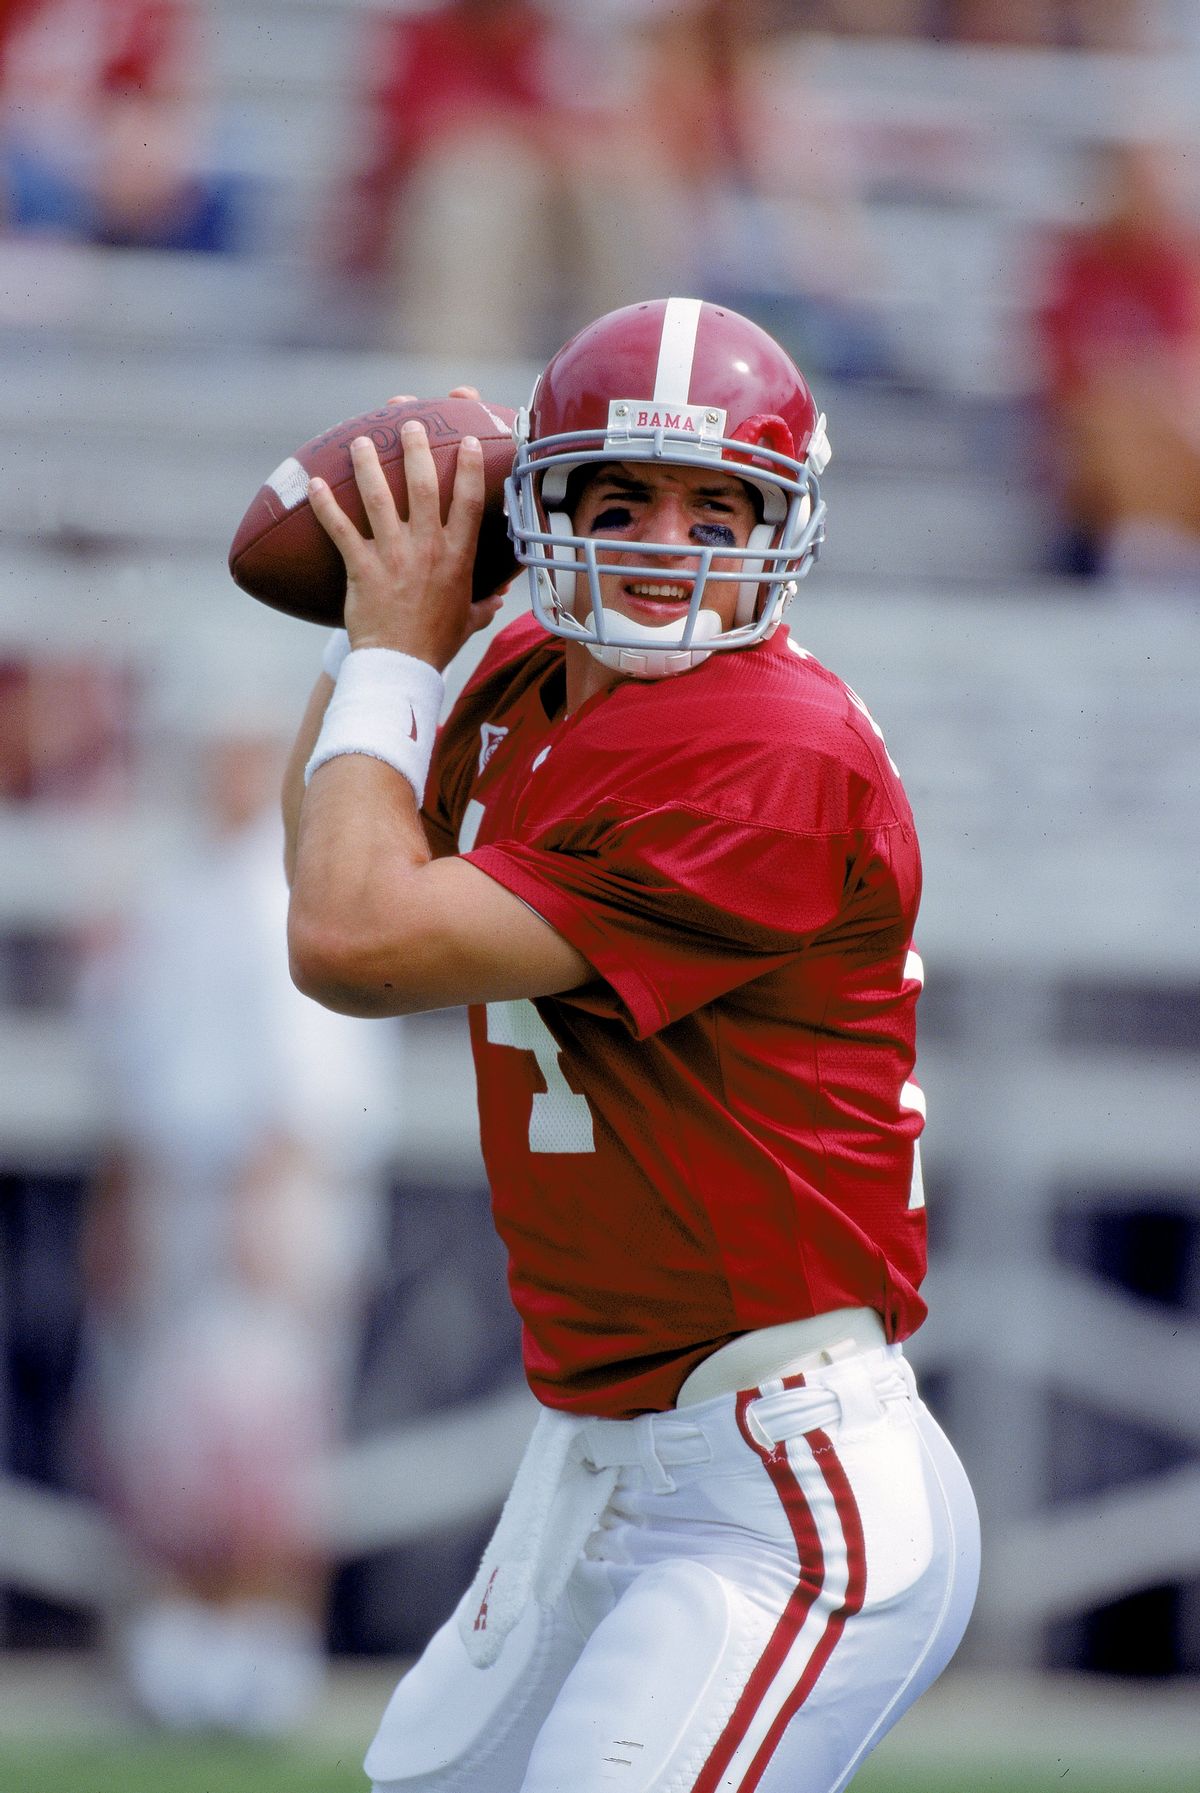 9 Sep 2000: Quarterback Tyler Watts #14 of the Alabama Crimson Tide looks to pass the ball during practice before the game against the Vanderbilt Commodores at Legion Field in Birmingham, Alabama.  The Commodores defeated the Crimson Tide 28-10. Mandatory Credit: Scott Halleran  /Allsport (Scott Halleran/Allsport)